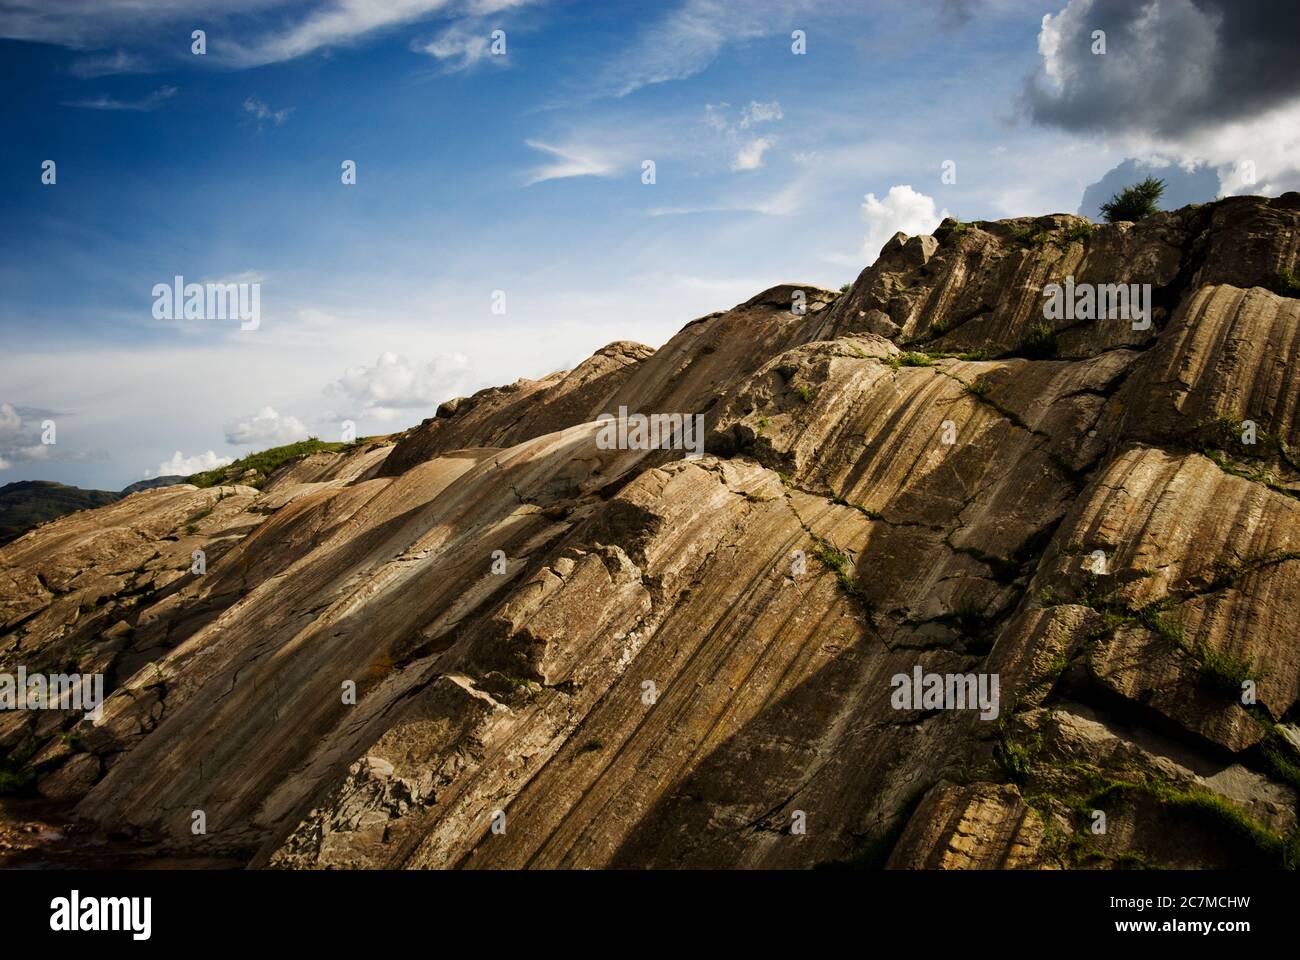 Saqsaywaman rock formation, a citadel on the northern outskirts of the city of Cusco, Peru, South America Stock Photo